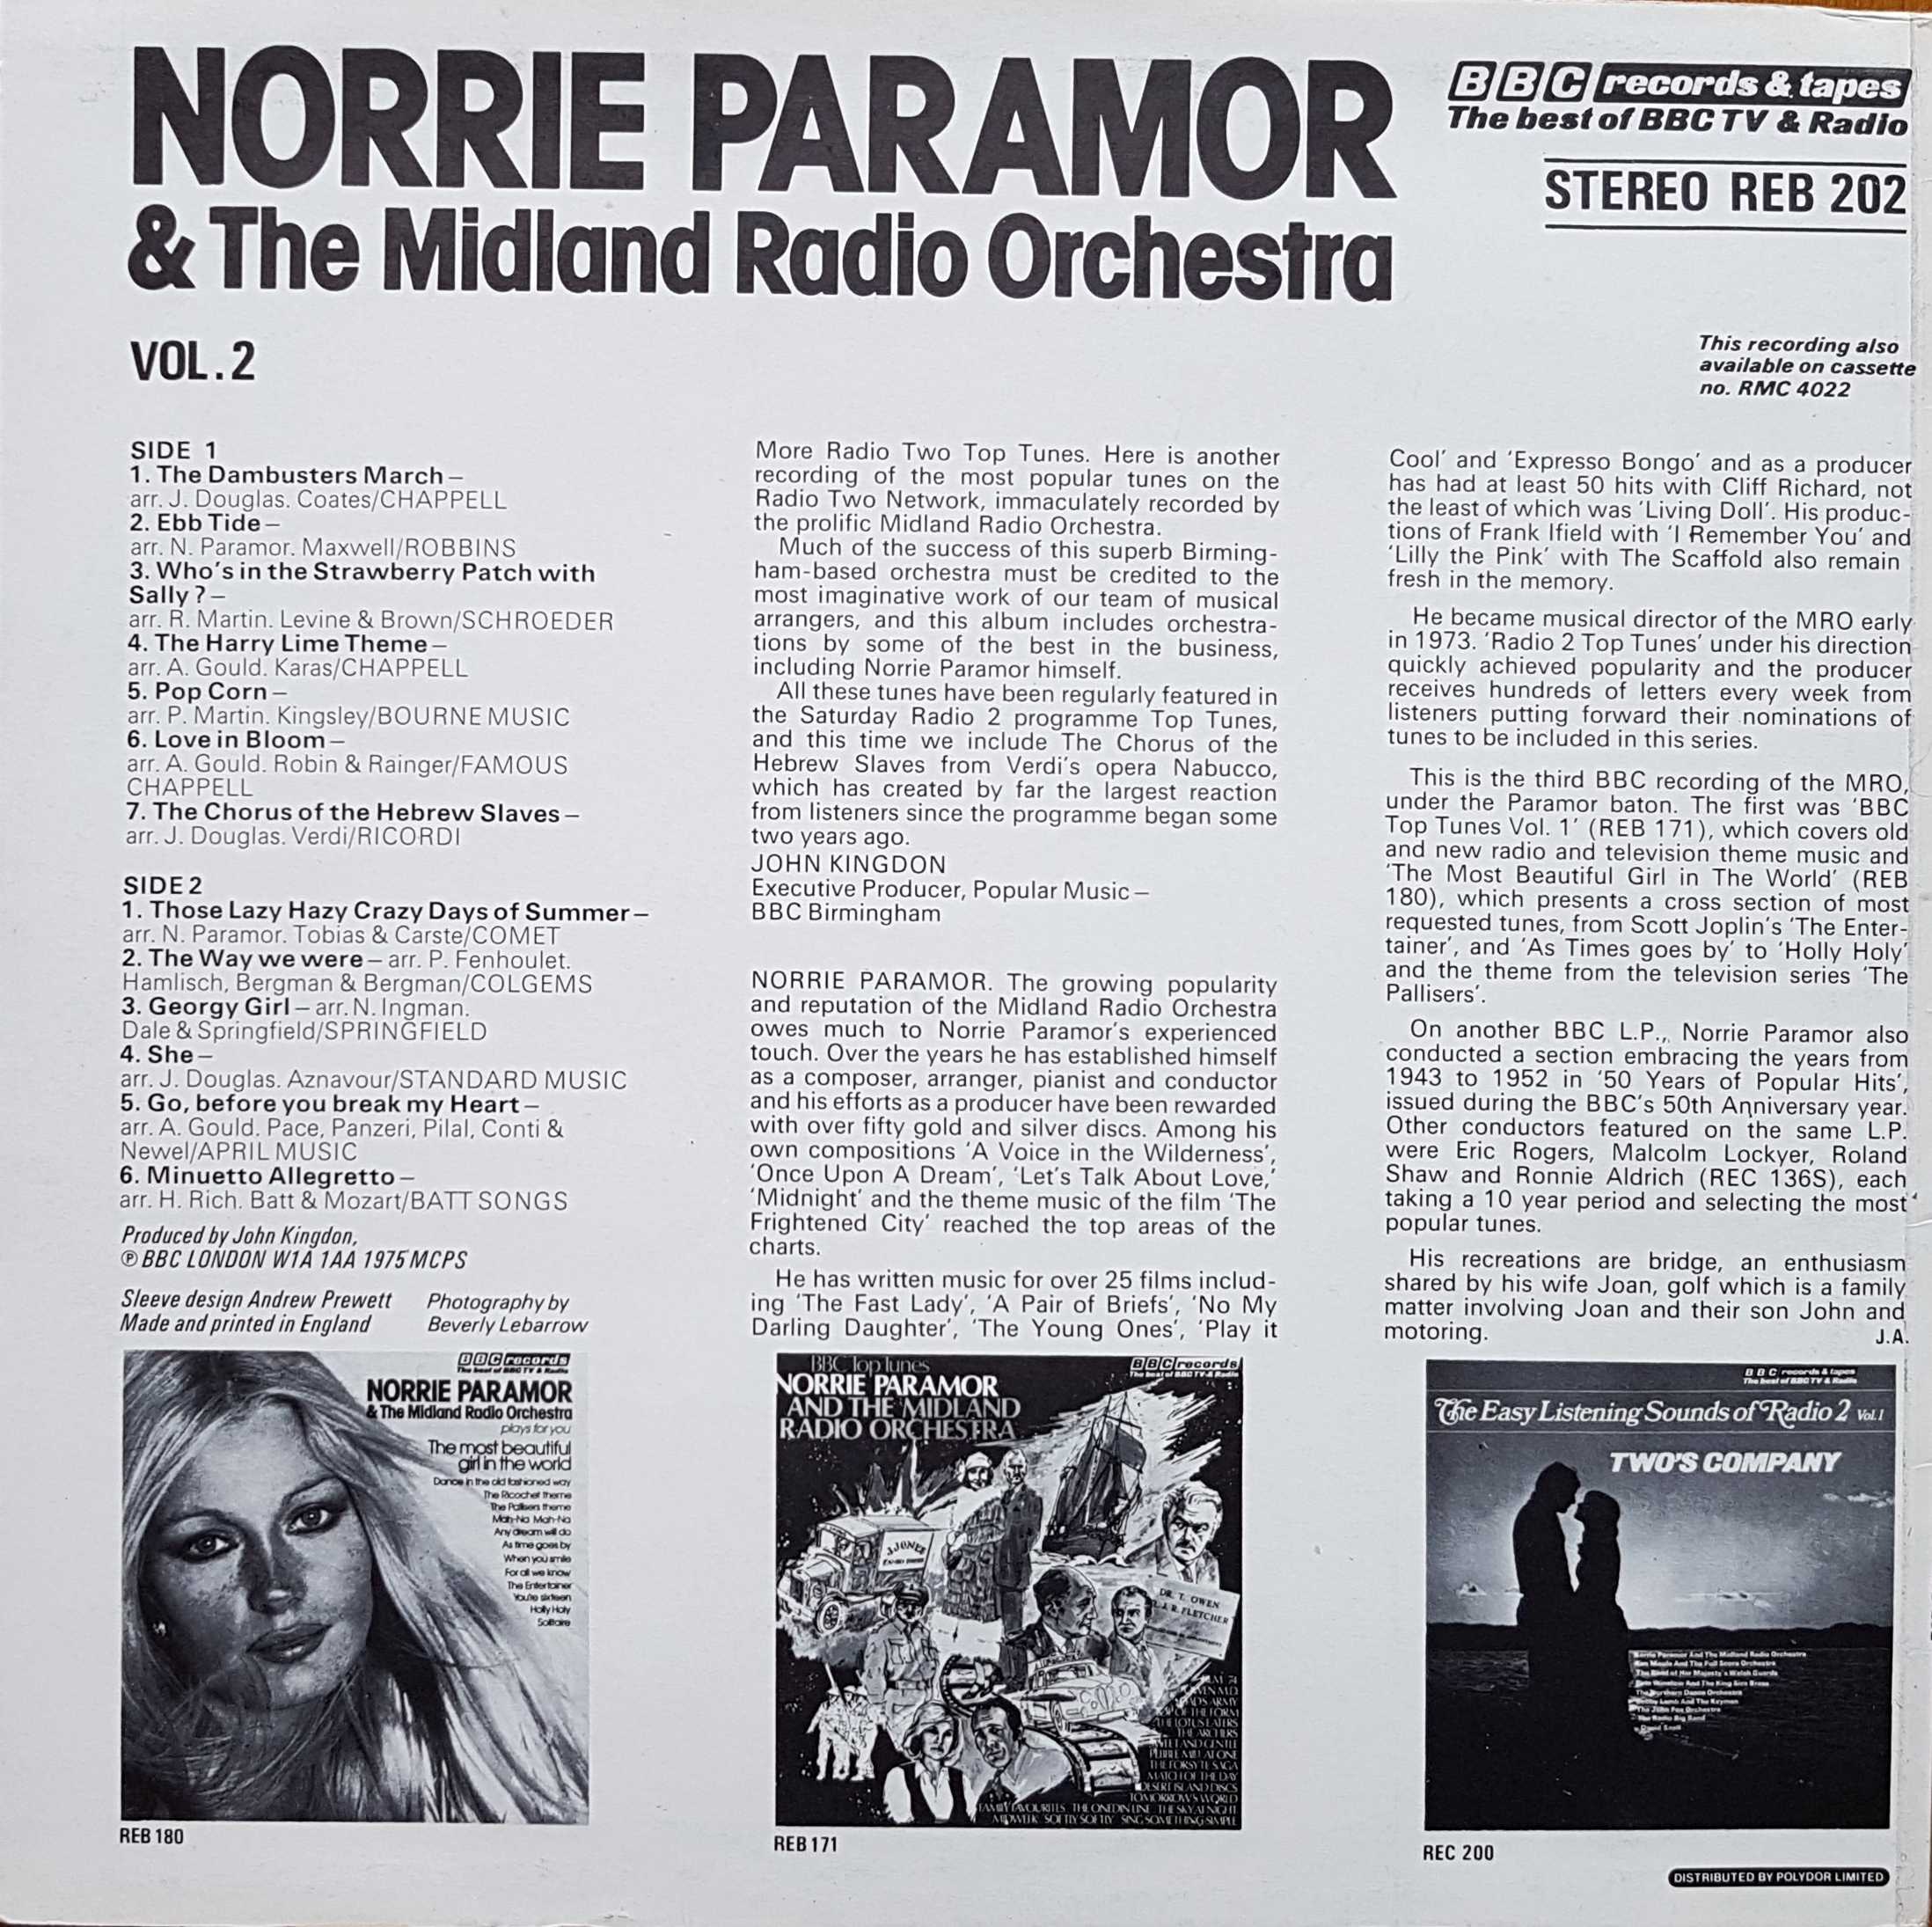 Picture of REB 202 Radio 2 top tunes - Volume 2 by artist Norrie Paramor and the Midland Radio Orchestra from the BBC records and Tapes library